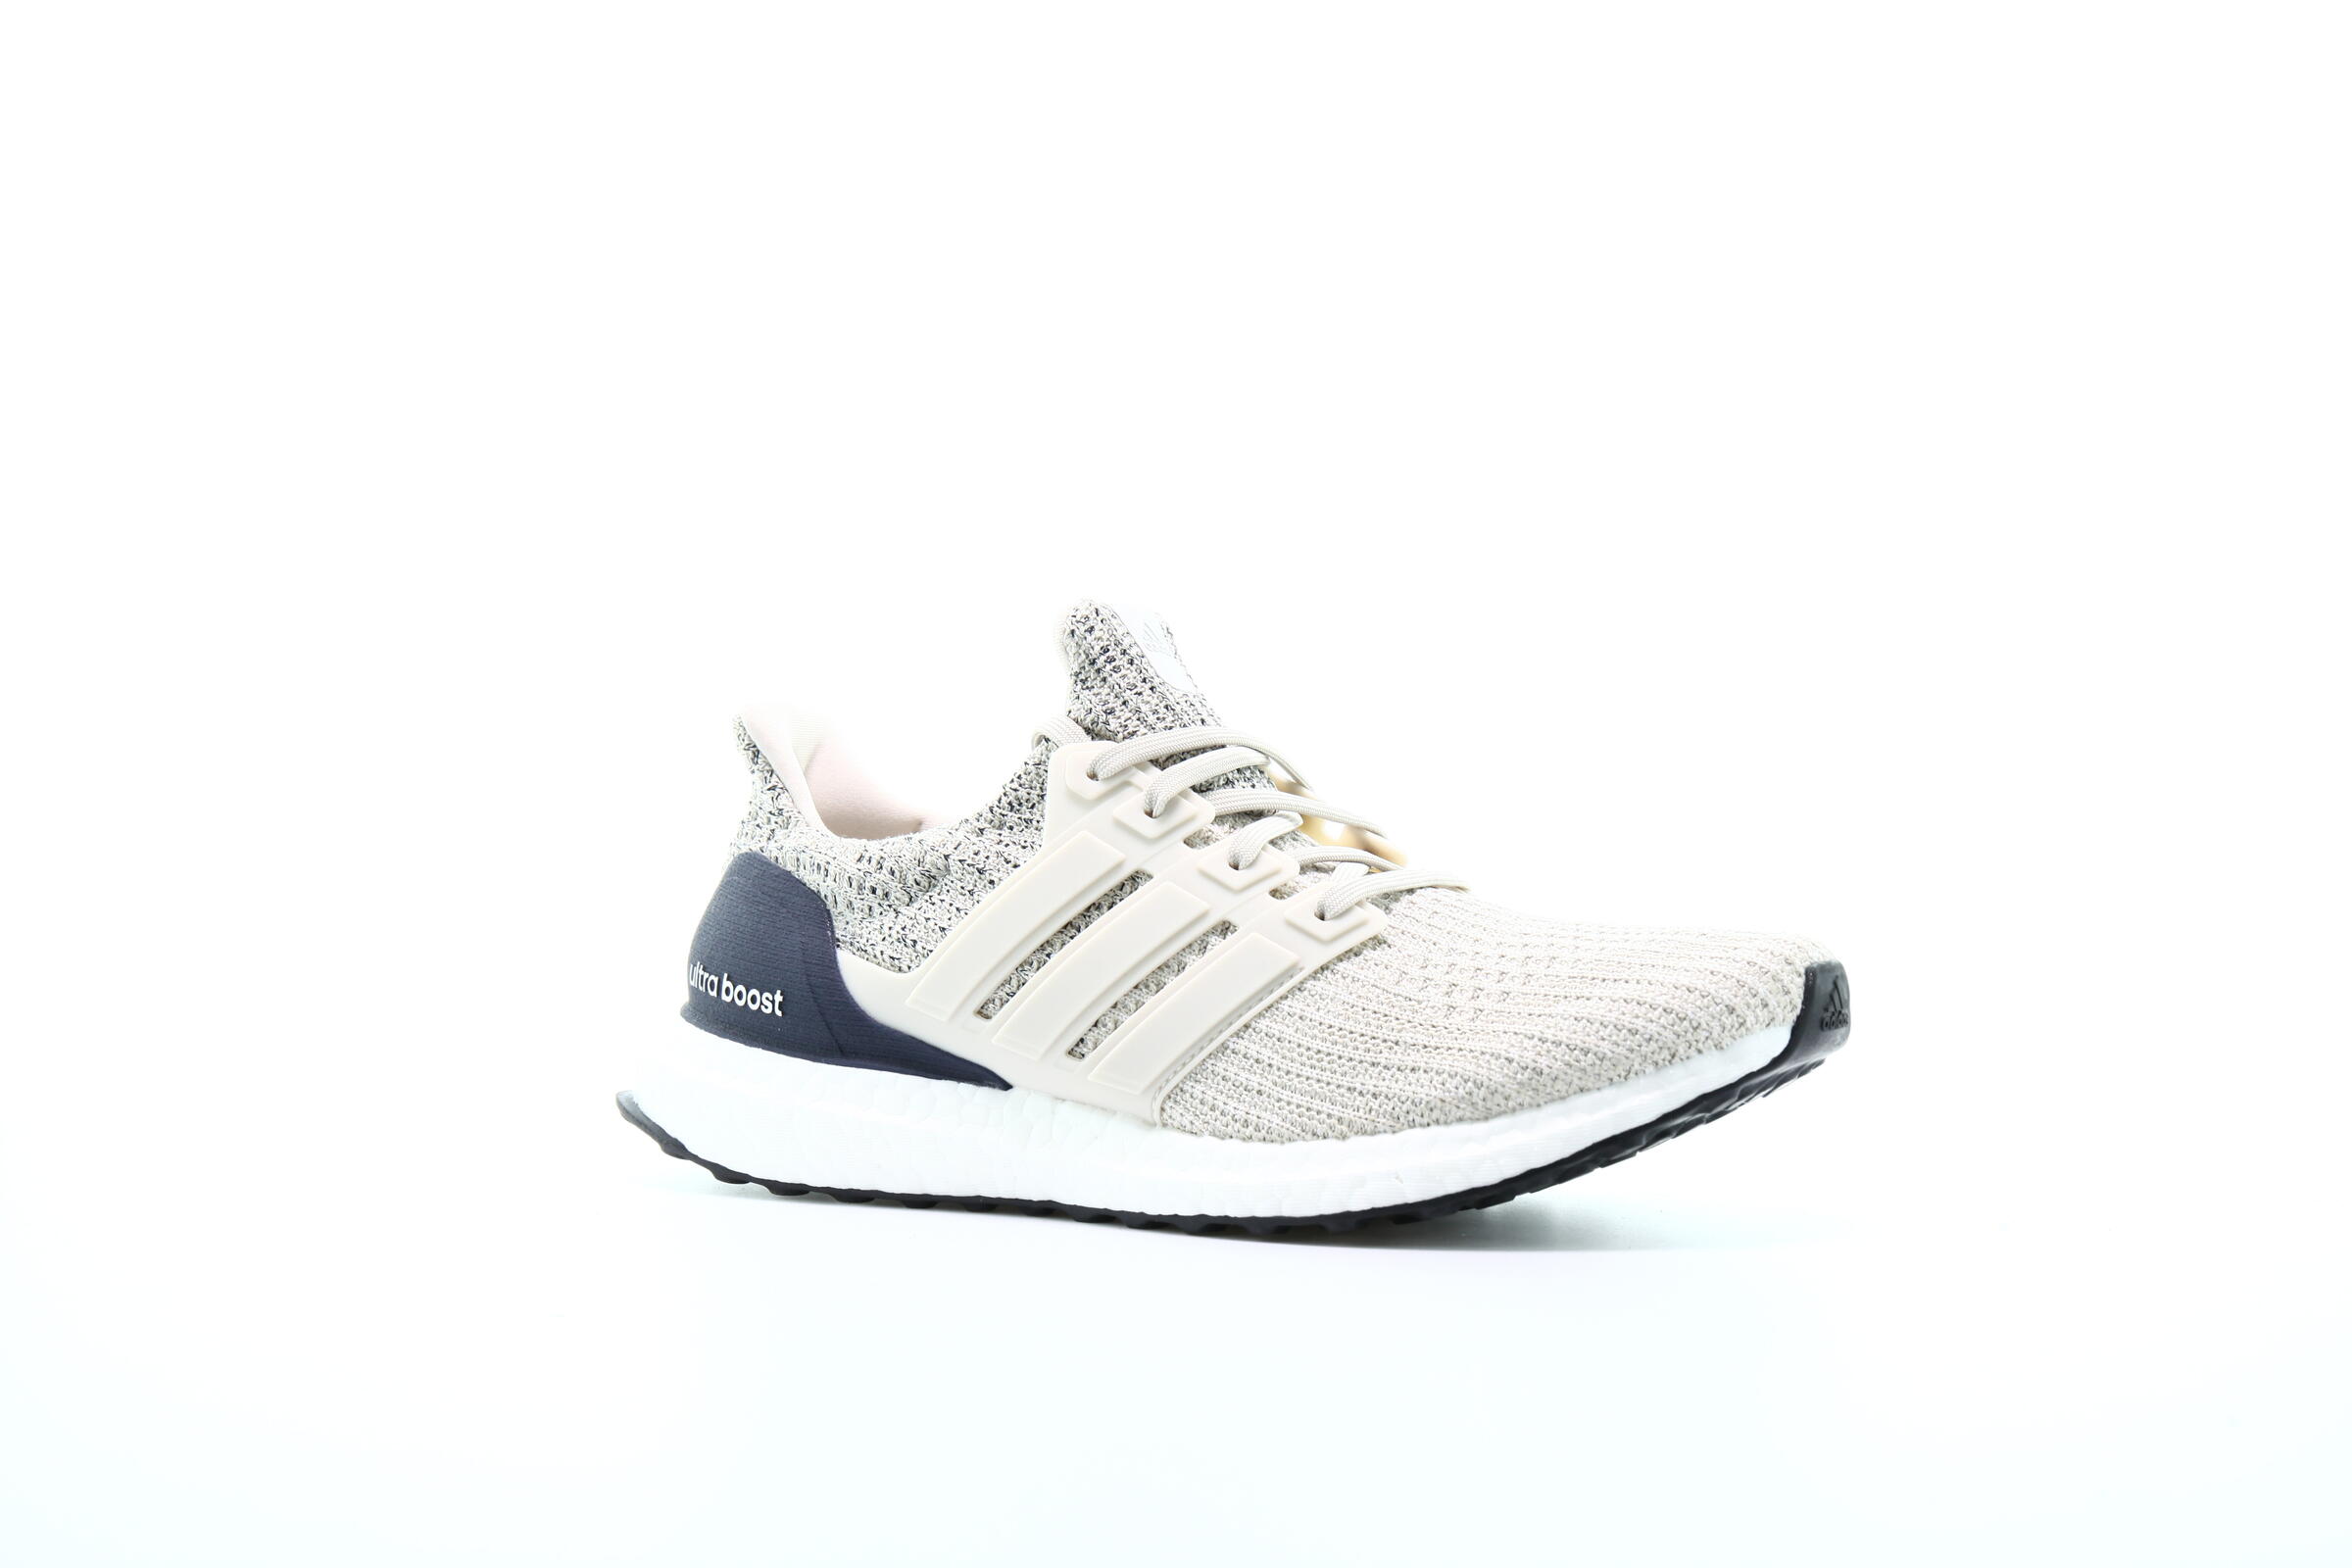 adidas Performance Ultraboost "Clear Brown"